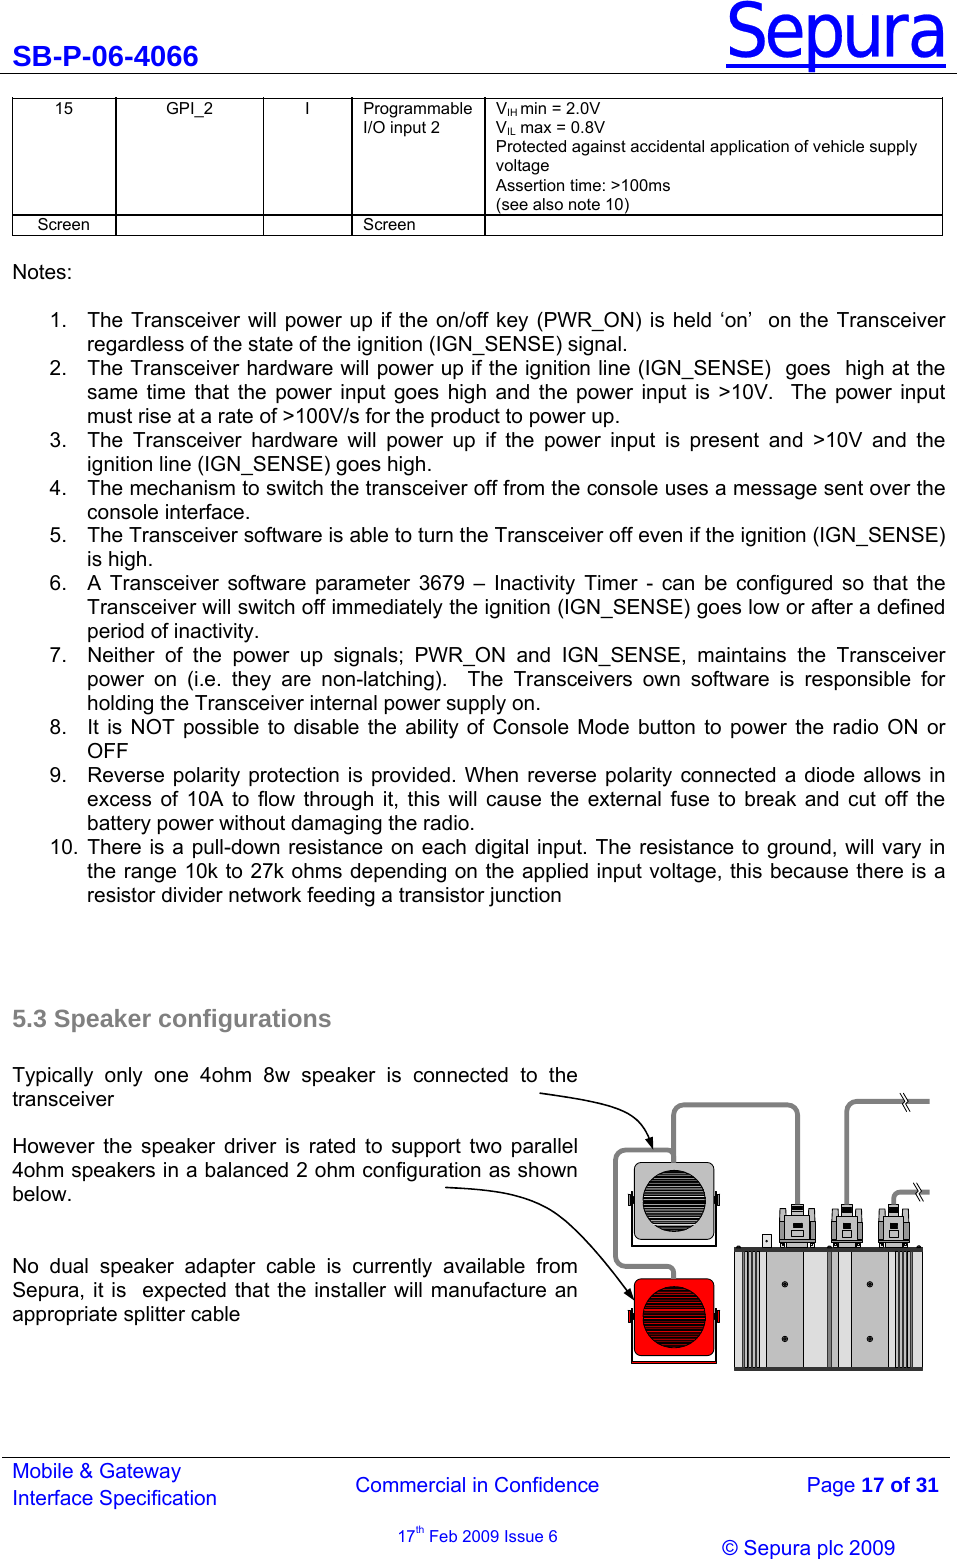 SB-P-06-4066 Sepura  Commercial in Confidence   Page 17 of 31 Mobile &amp; Gateway Interface Specification 17th Feb 2009 Issue 6                © Sepura plc 2009   15 GPI_2 I Programmable I/O input 2 VIH min = 2.0V VIL max = 0.8V Protected against accidental application of vehicle supply voltage Assertion time: &gt;100ms (see also note 10) Screen    Screen   Notes:   1.  The Transceiver will power up if the on/off key (PWR_ON) is held ‘on’  on the Transceiver regardless of the state of the ignition (IGN_SENSE) signal. 2.  The Transceiver hardware will power up if the ignition line (IGN_SENSE)  goes  high at the same time that the power input goes high and the power input is &gt;10V.  The power input must rise at a rate of &gt;100V/s for the product to power up.  3.  The Transceiver hardware will power up if the power input is present and &gt;10V and the ignition line (IGN_SENSE) goes high. 4.  The mechanism to switch the transceiver off from the console uses a message sent over the console interface. 5.  The Transceiver software is able to turn the Transceiver off even if the ignition (IGN_SENSE) is high. 6.  A Transceiver software parameter 3679 – Inactivity Timer - can be configured so that the Transceiver will switch off immediately the ignition (IGN_SENSE) goes low or after a defined period of inactivity.  7.  Neither of the power up signals; PWR_ON and IGN_SENSE, maintains the Transceiver power on (i.e. they are non-latching).  The Transceivers own software is responsible for holding the Transceiver internal power supply on. 8.  It is NOT possible to disable the ability of Console Mode button to power the radio ON or OFF 9.  Reverse polarity protection is provided. When reverse polarity connected a diode allows in excess of 10A to flow through it, this will cause the external fuse to break and cut off the battery power without damaging the radio. 10. There is a pull-down resistance on each digital input. The resistance to ground, will vary in the range 10k to 27k ohms depending on the applied input voltage, this because there is a resistor divider network feeding a transistor junction    5.3 Speaker configurations  Typically only one 4ohm 8w speaker is connected to the transceiver  However the speaker driver is rated to support two parallel 4ohm speakers in a balanced 2 ohm configuration as shown below.    No dual speaker adapter cable is currently available from Sepura, it is  expected that the installer will manufacture an appropriate splitter cable       